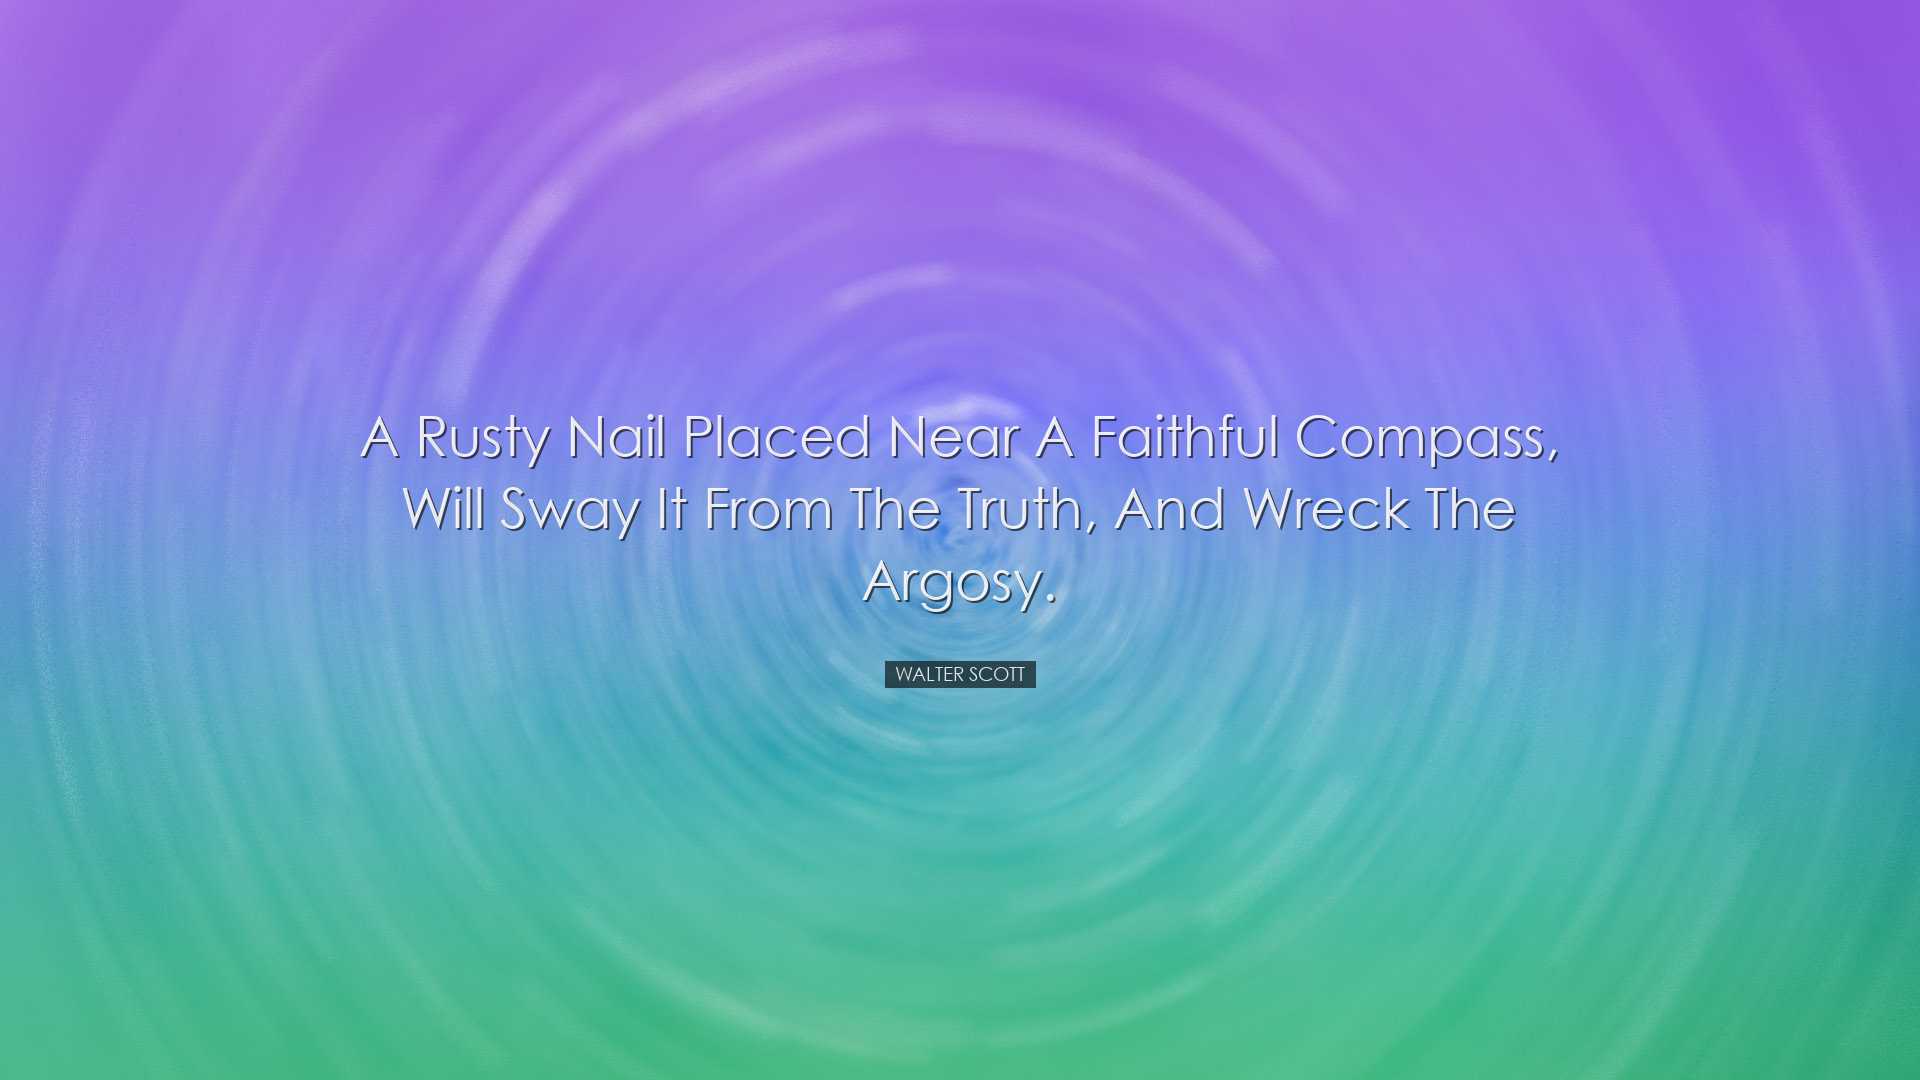 A rusty nail placed near a faithful compass, will sway it from the